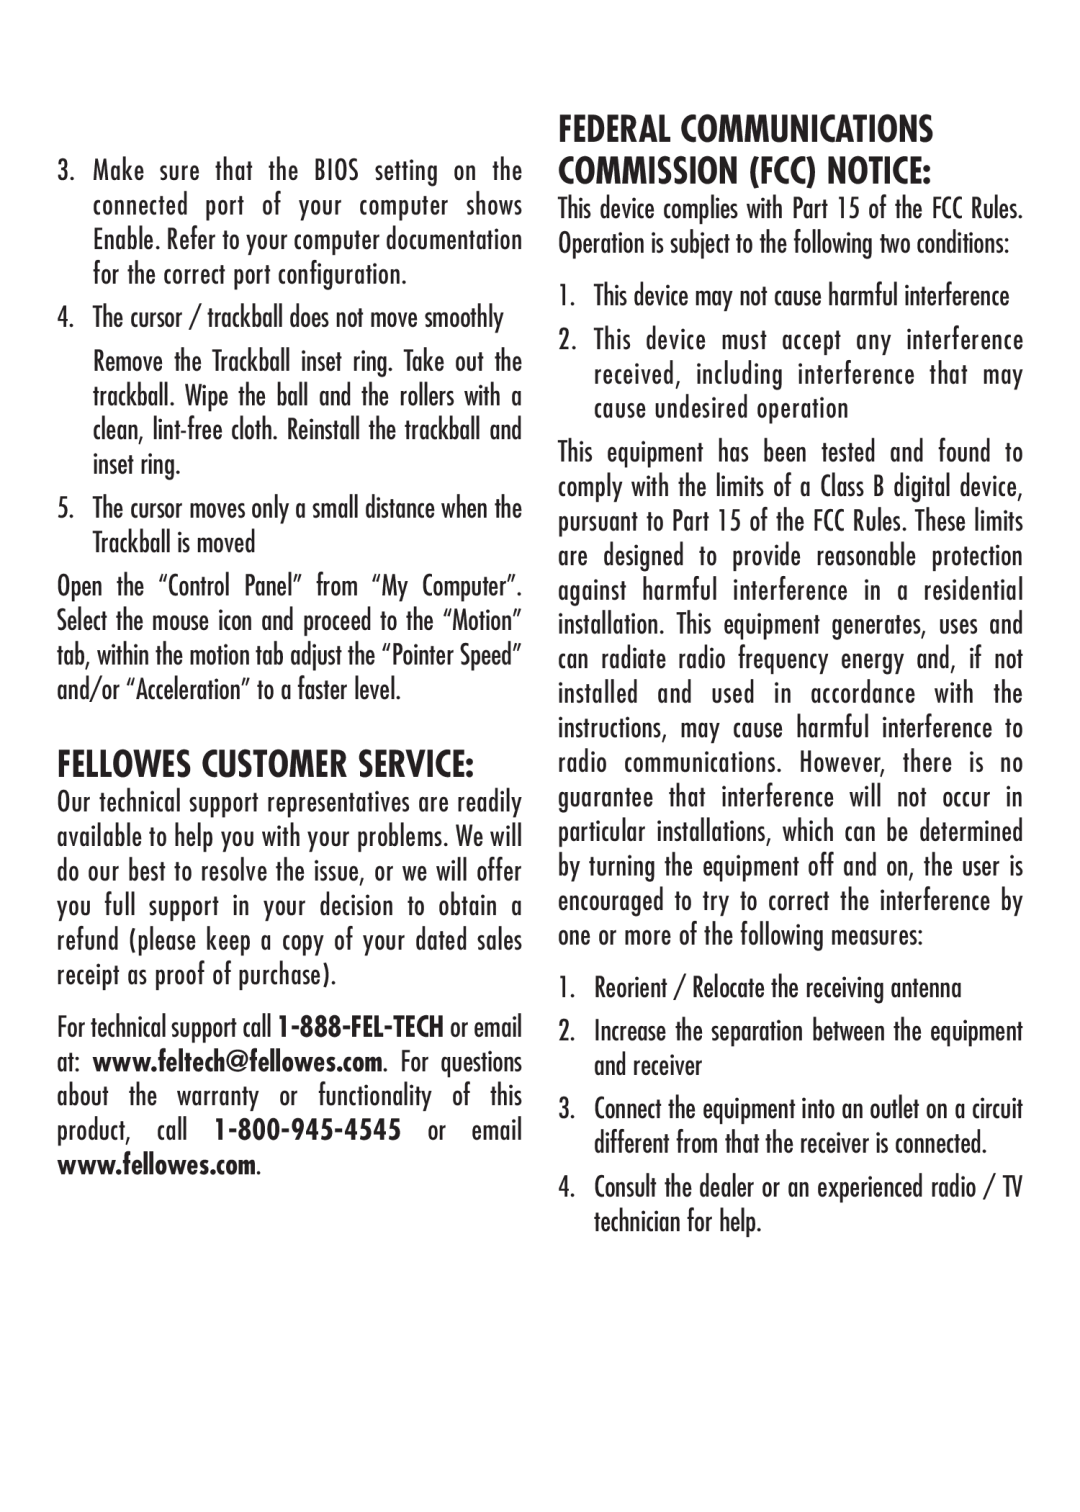 Fellowes Computer Accessories manual Fellowes Customer Service, Federal Communications Commission Fcc Notice 